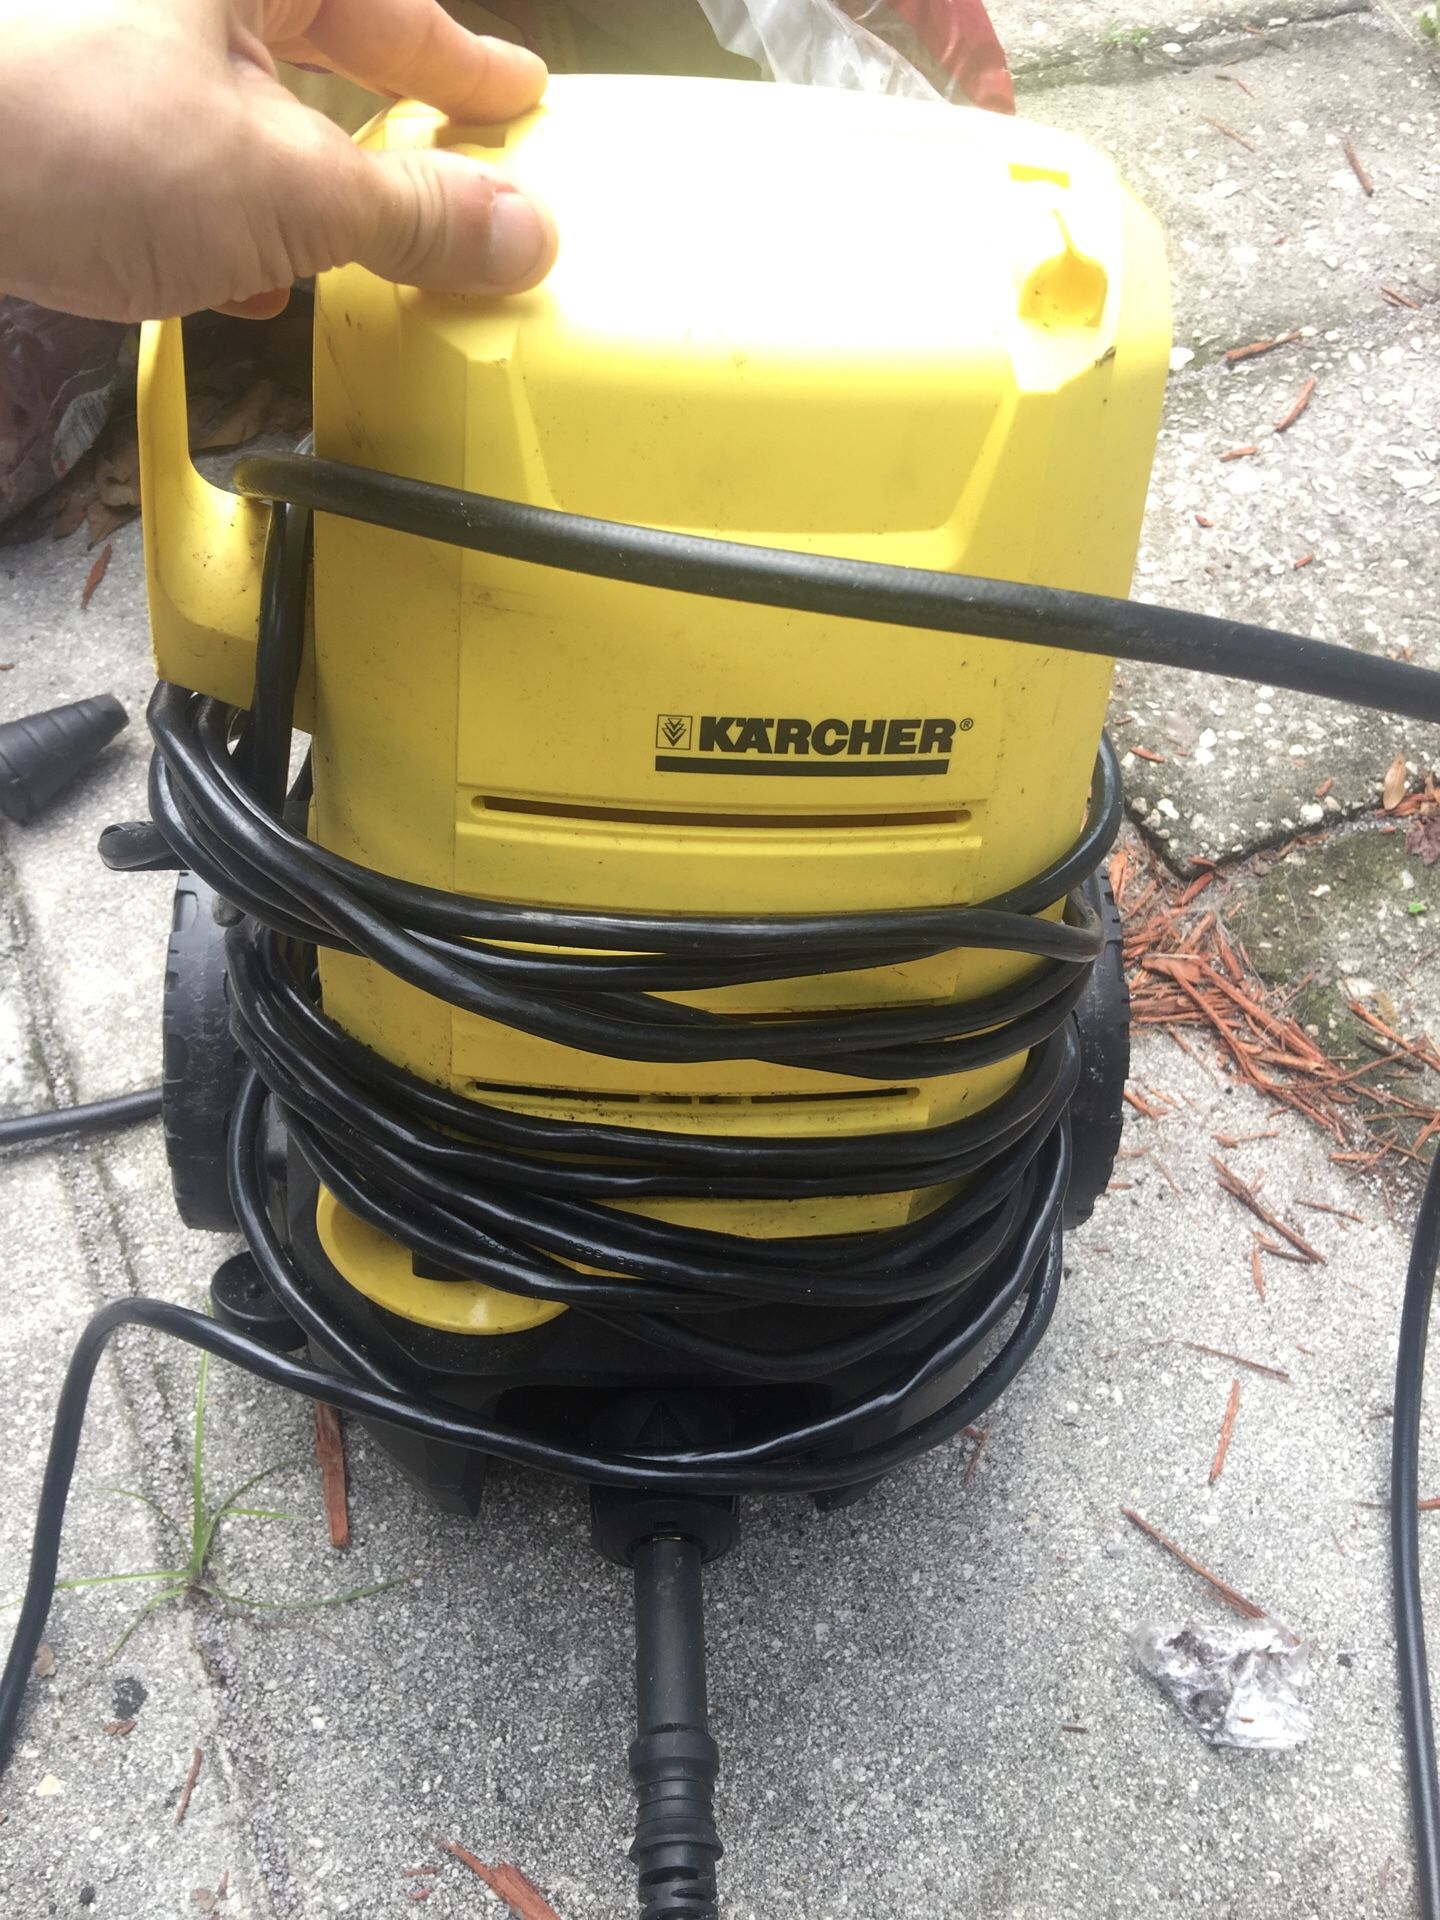 Pressure washer 1600 psi nothing wrong